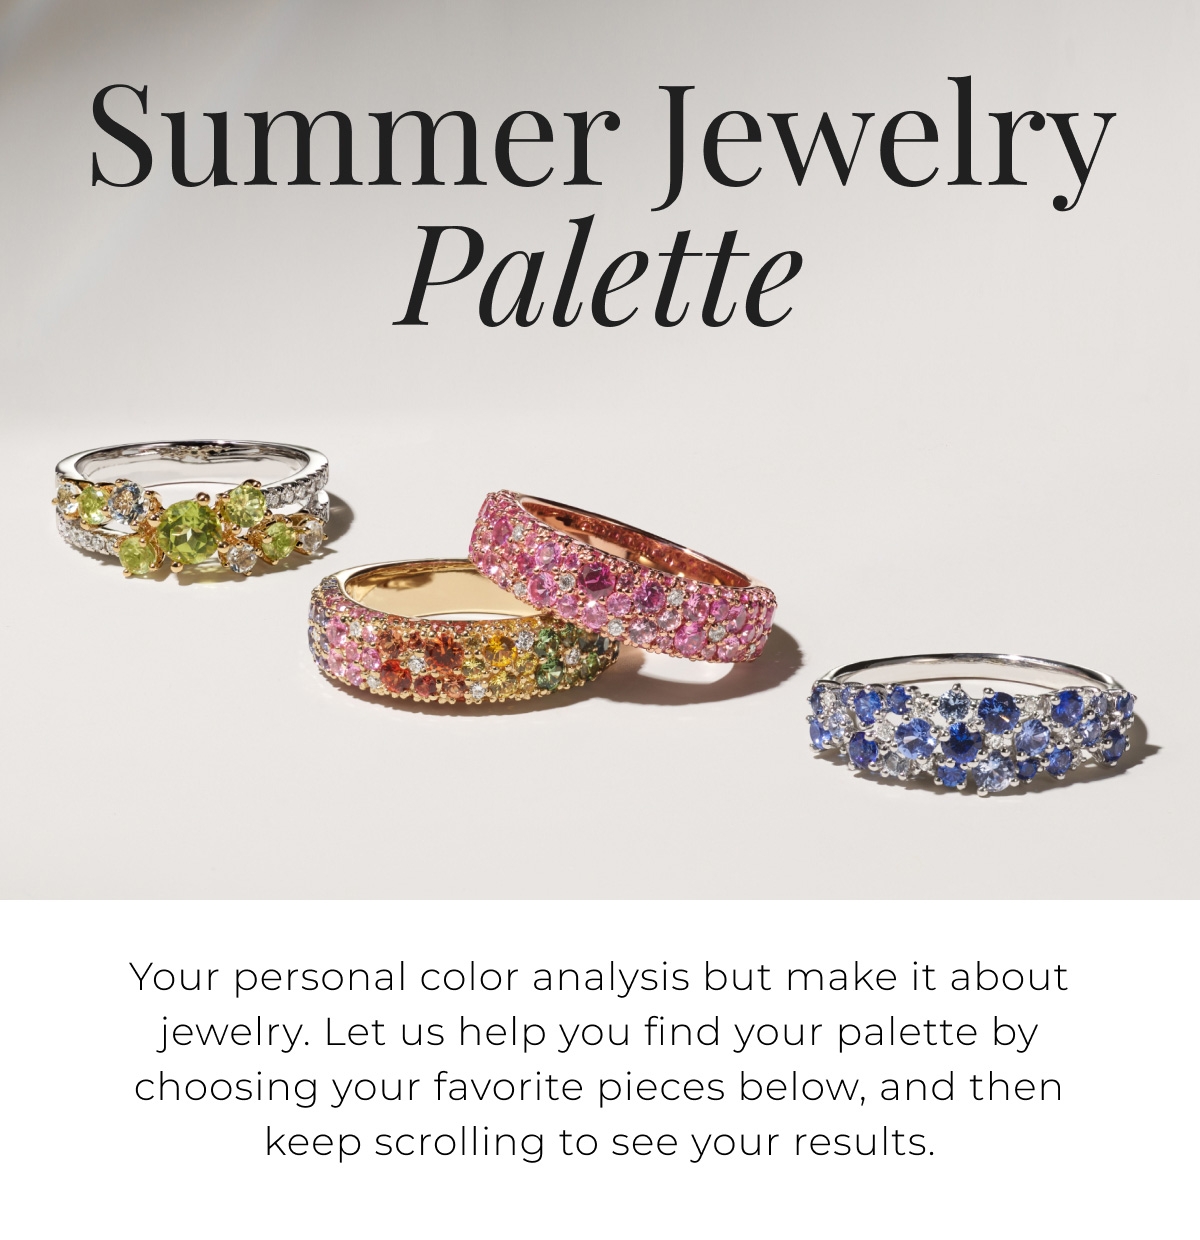 Summer Jewelry Palette - Your personal color analysis but make it about jewelry. Let us help you find your palette by choosing your favorite pieces below, and then keep scrolling to see your results.